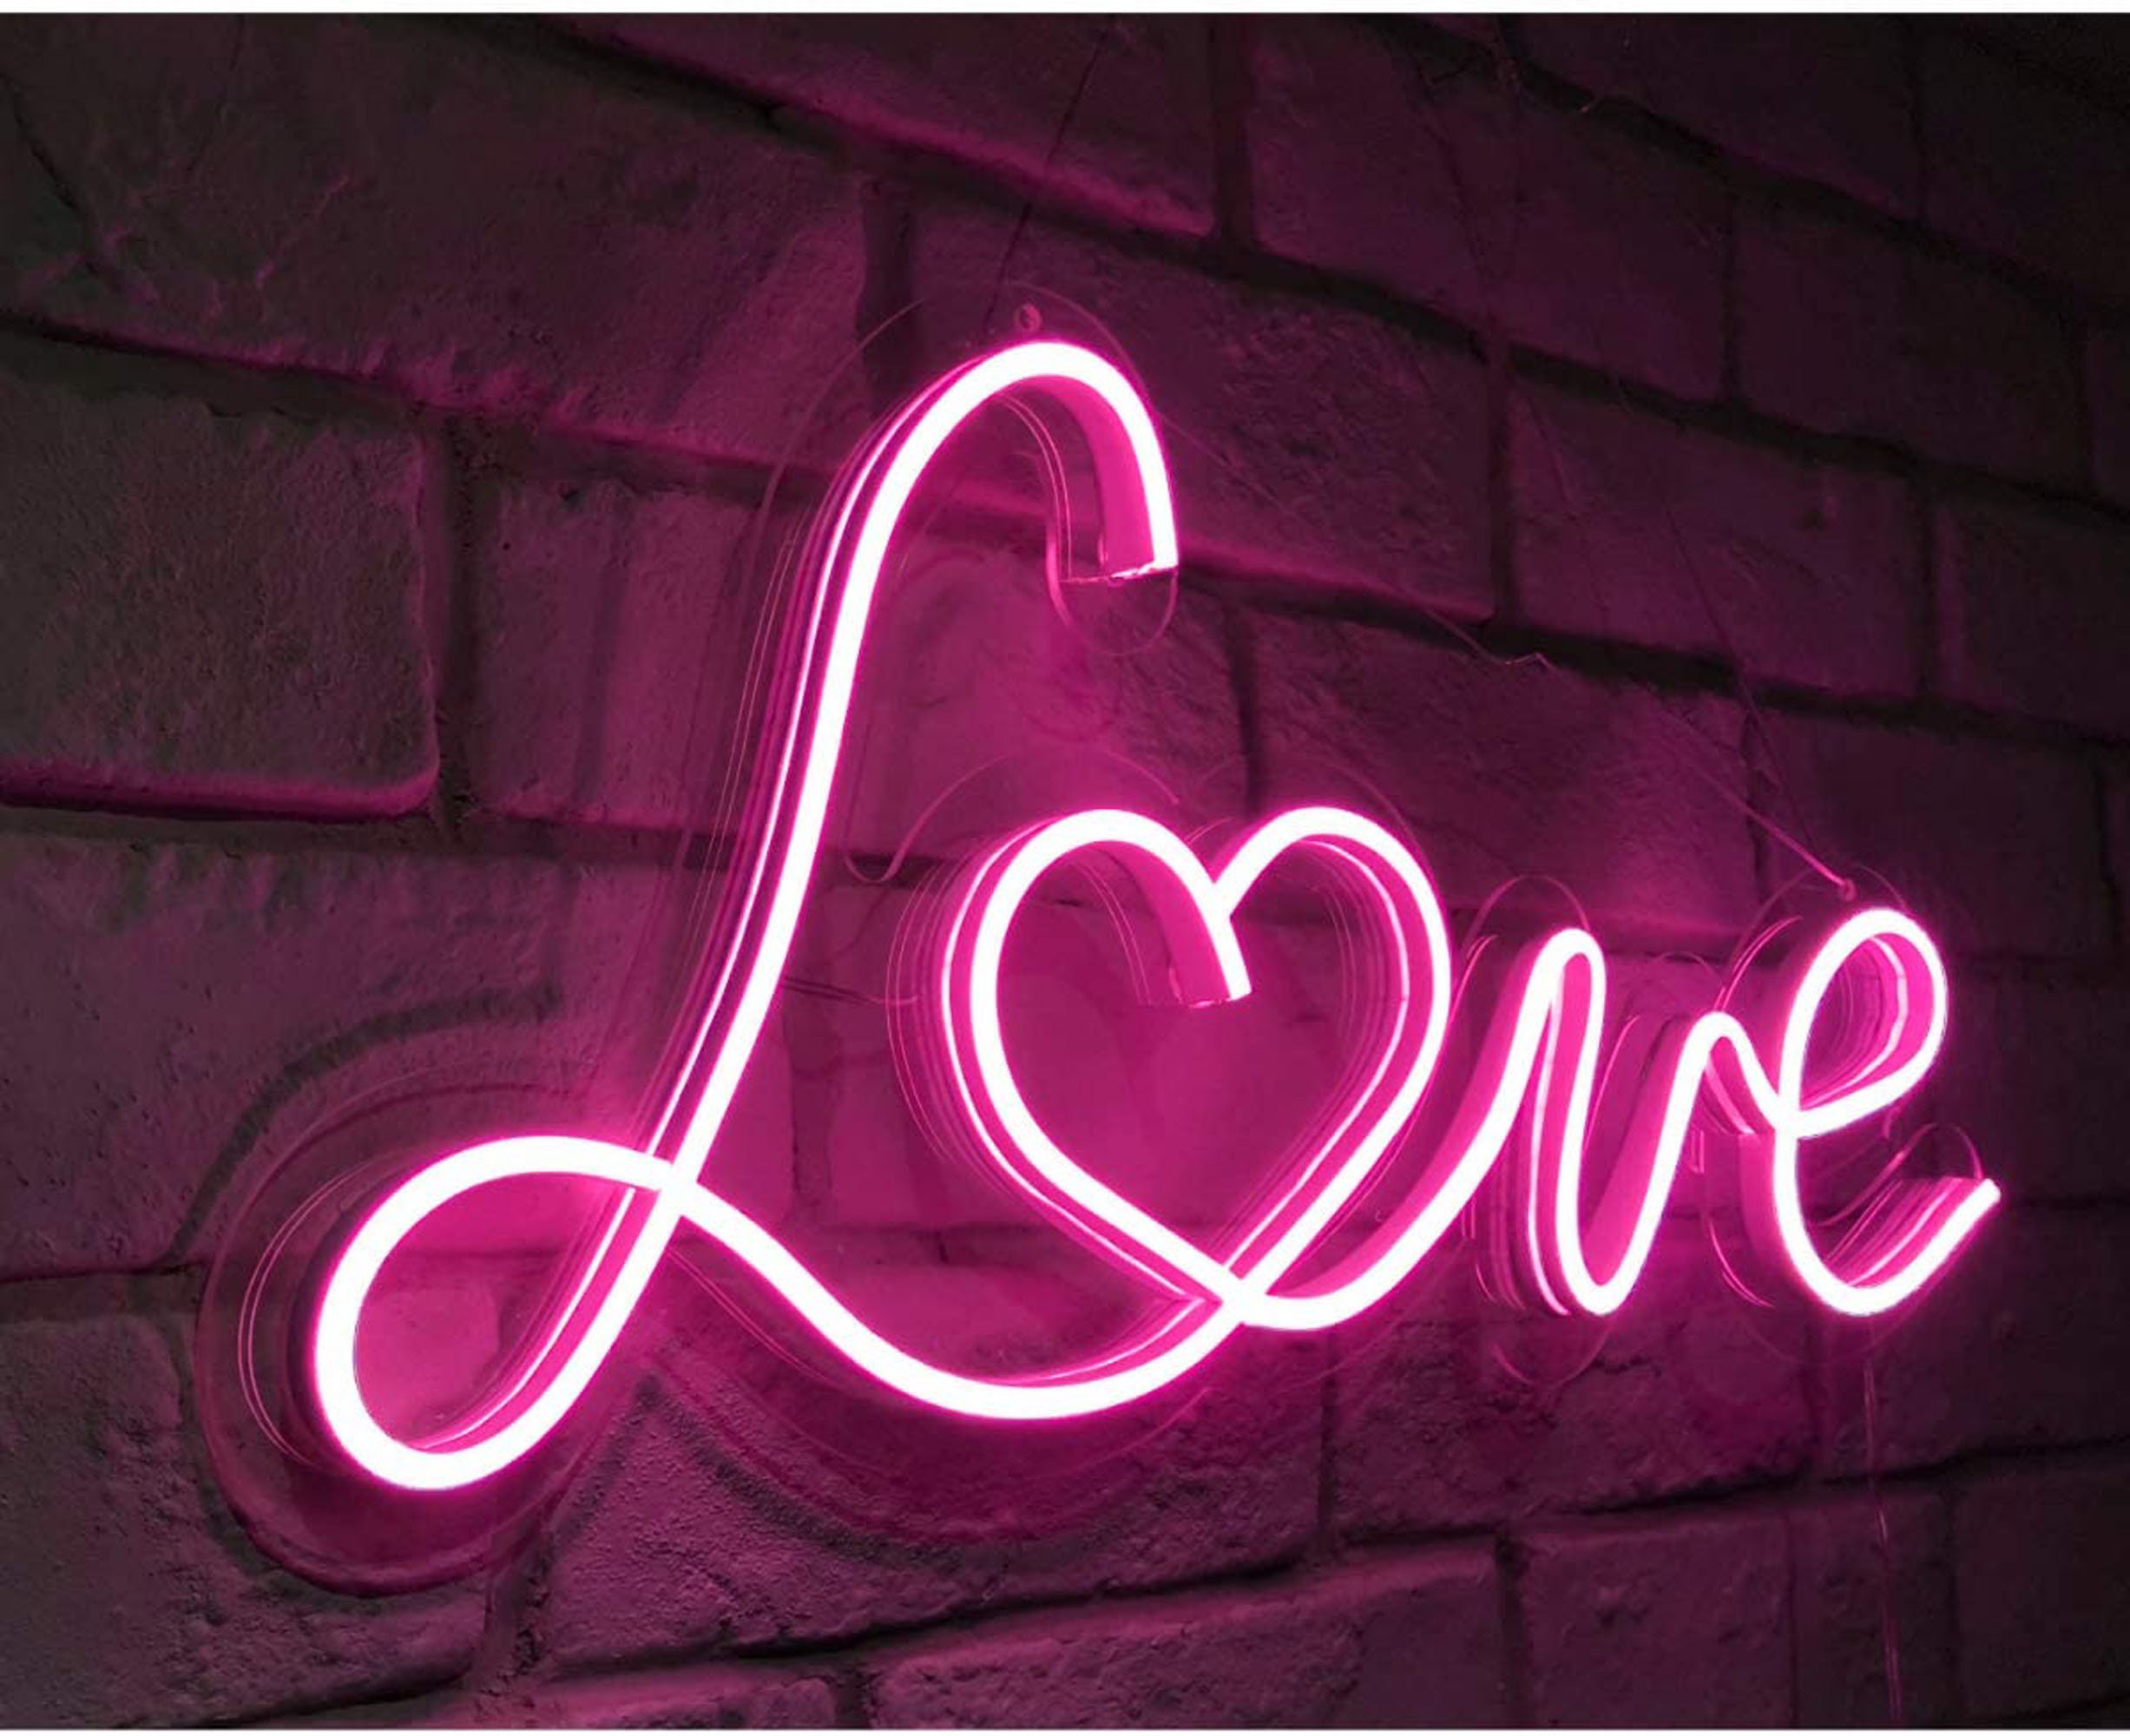 Neon Love Signs Light Led Pink Love Art Room Decor Sign Wall Table Decoration for Valentine’s Day Wedding Party Supplies Girl’s Room Decor Battery or USB Powered